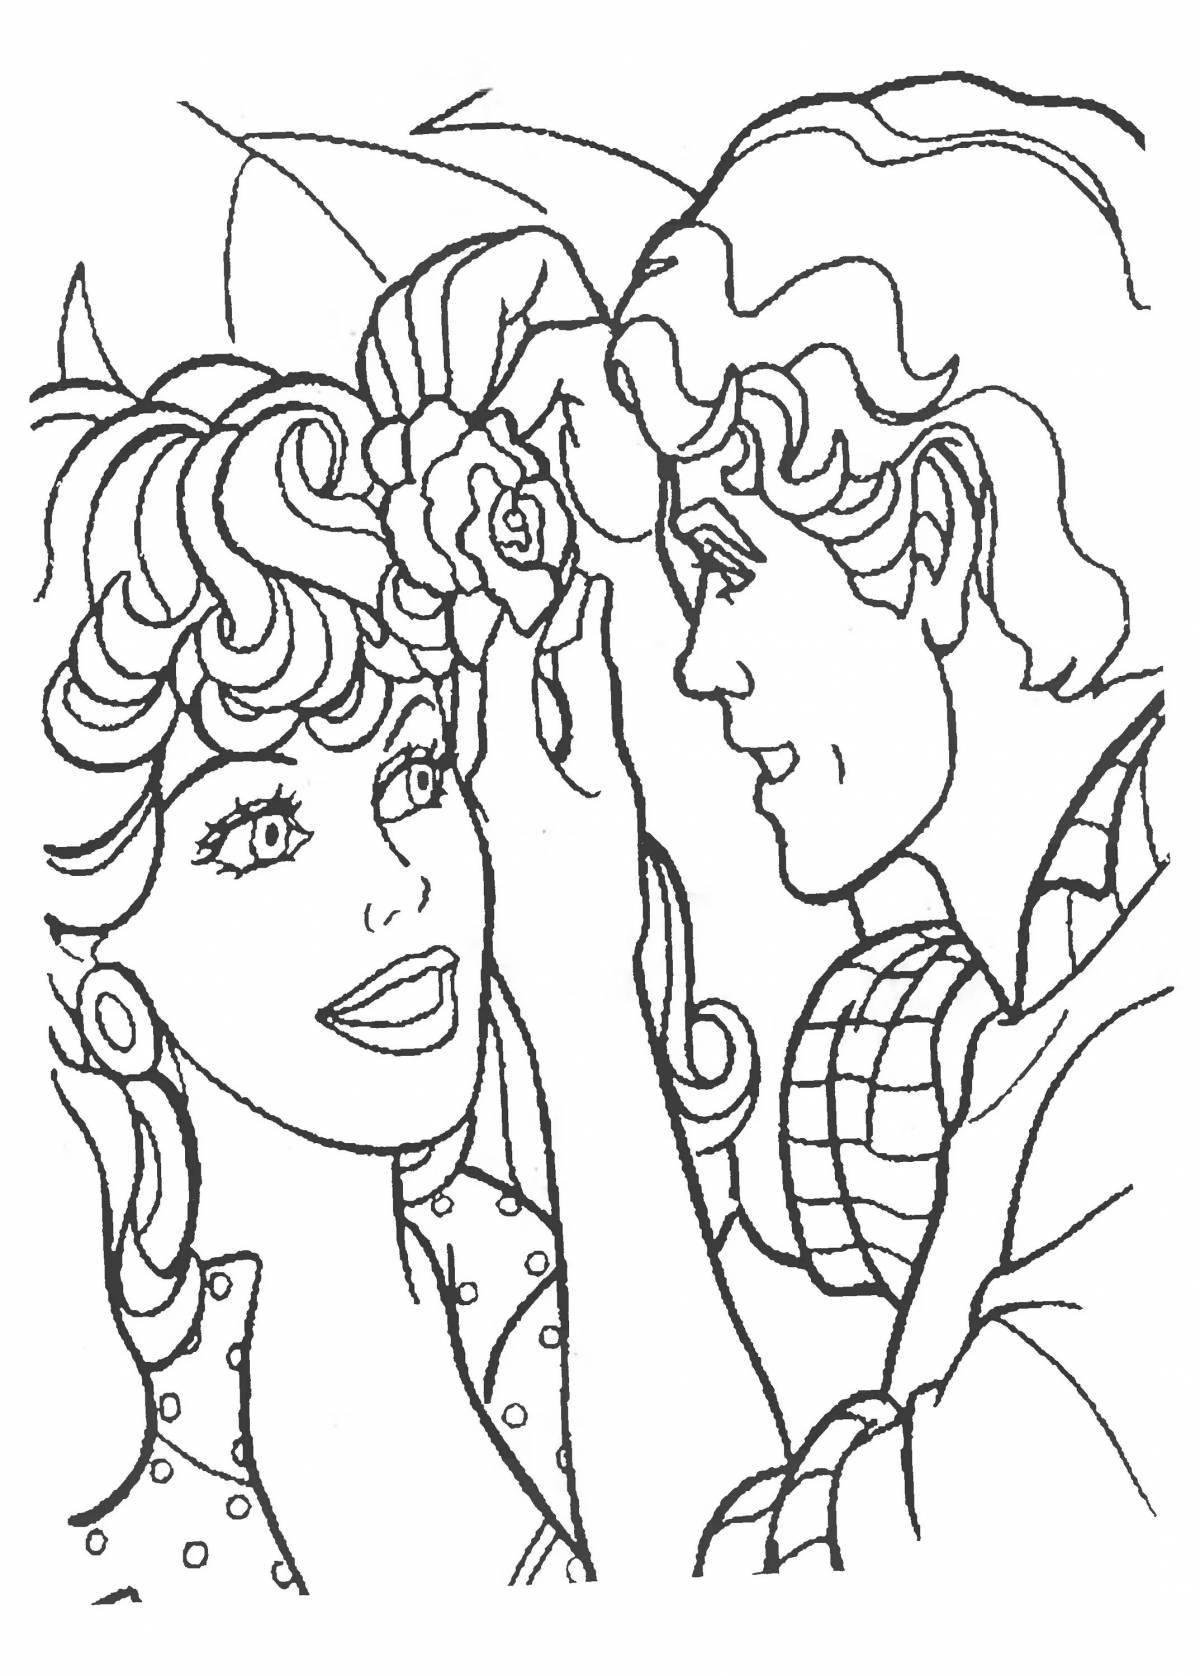 Frantic coloring book from the 90s